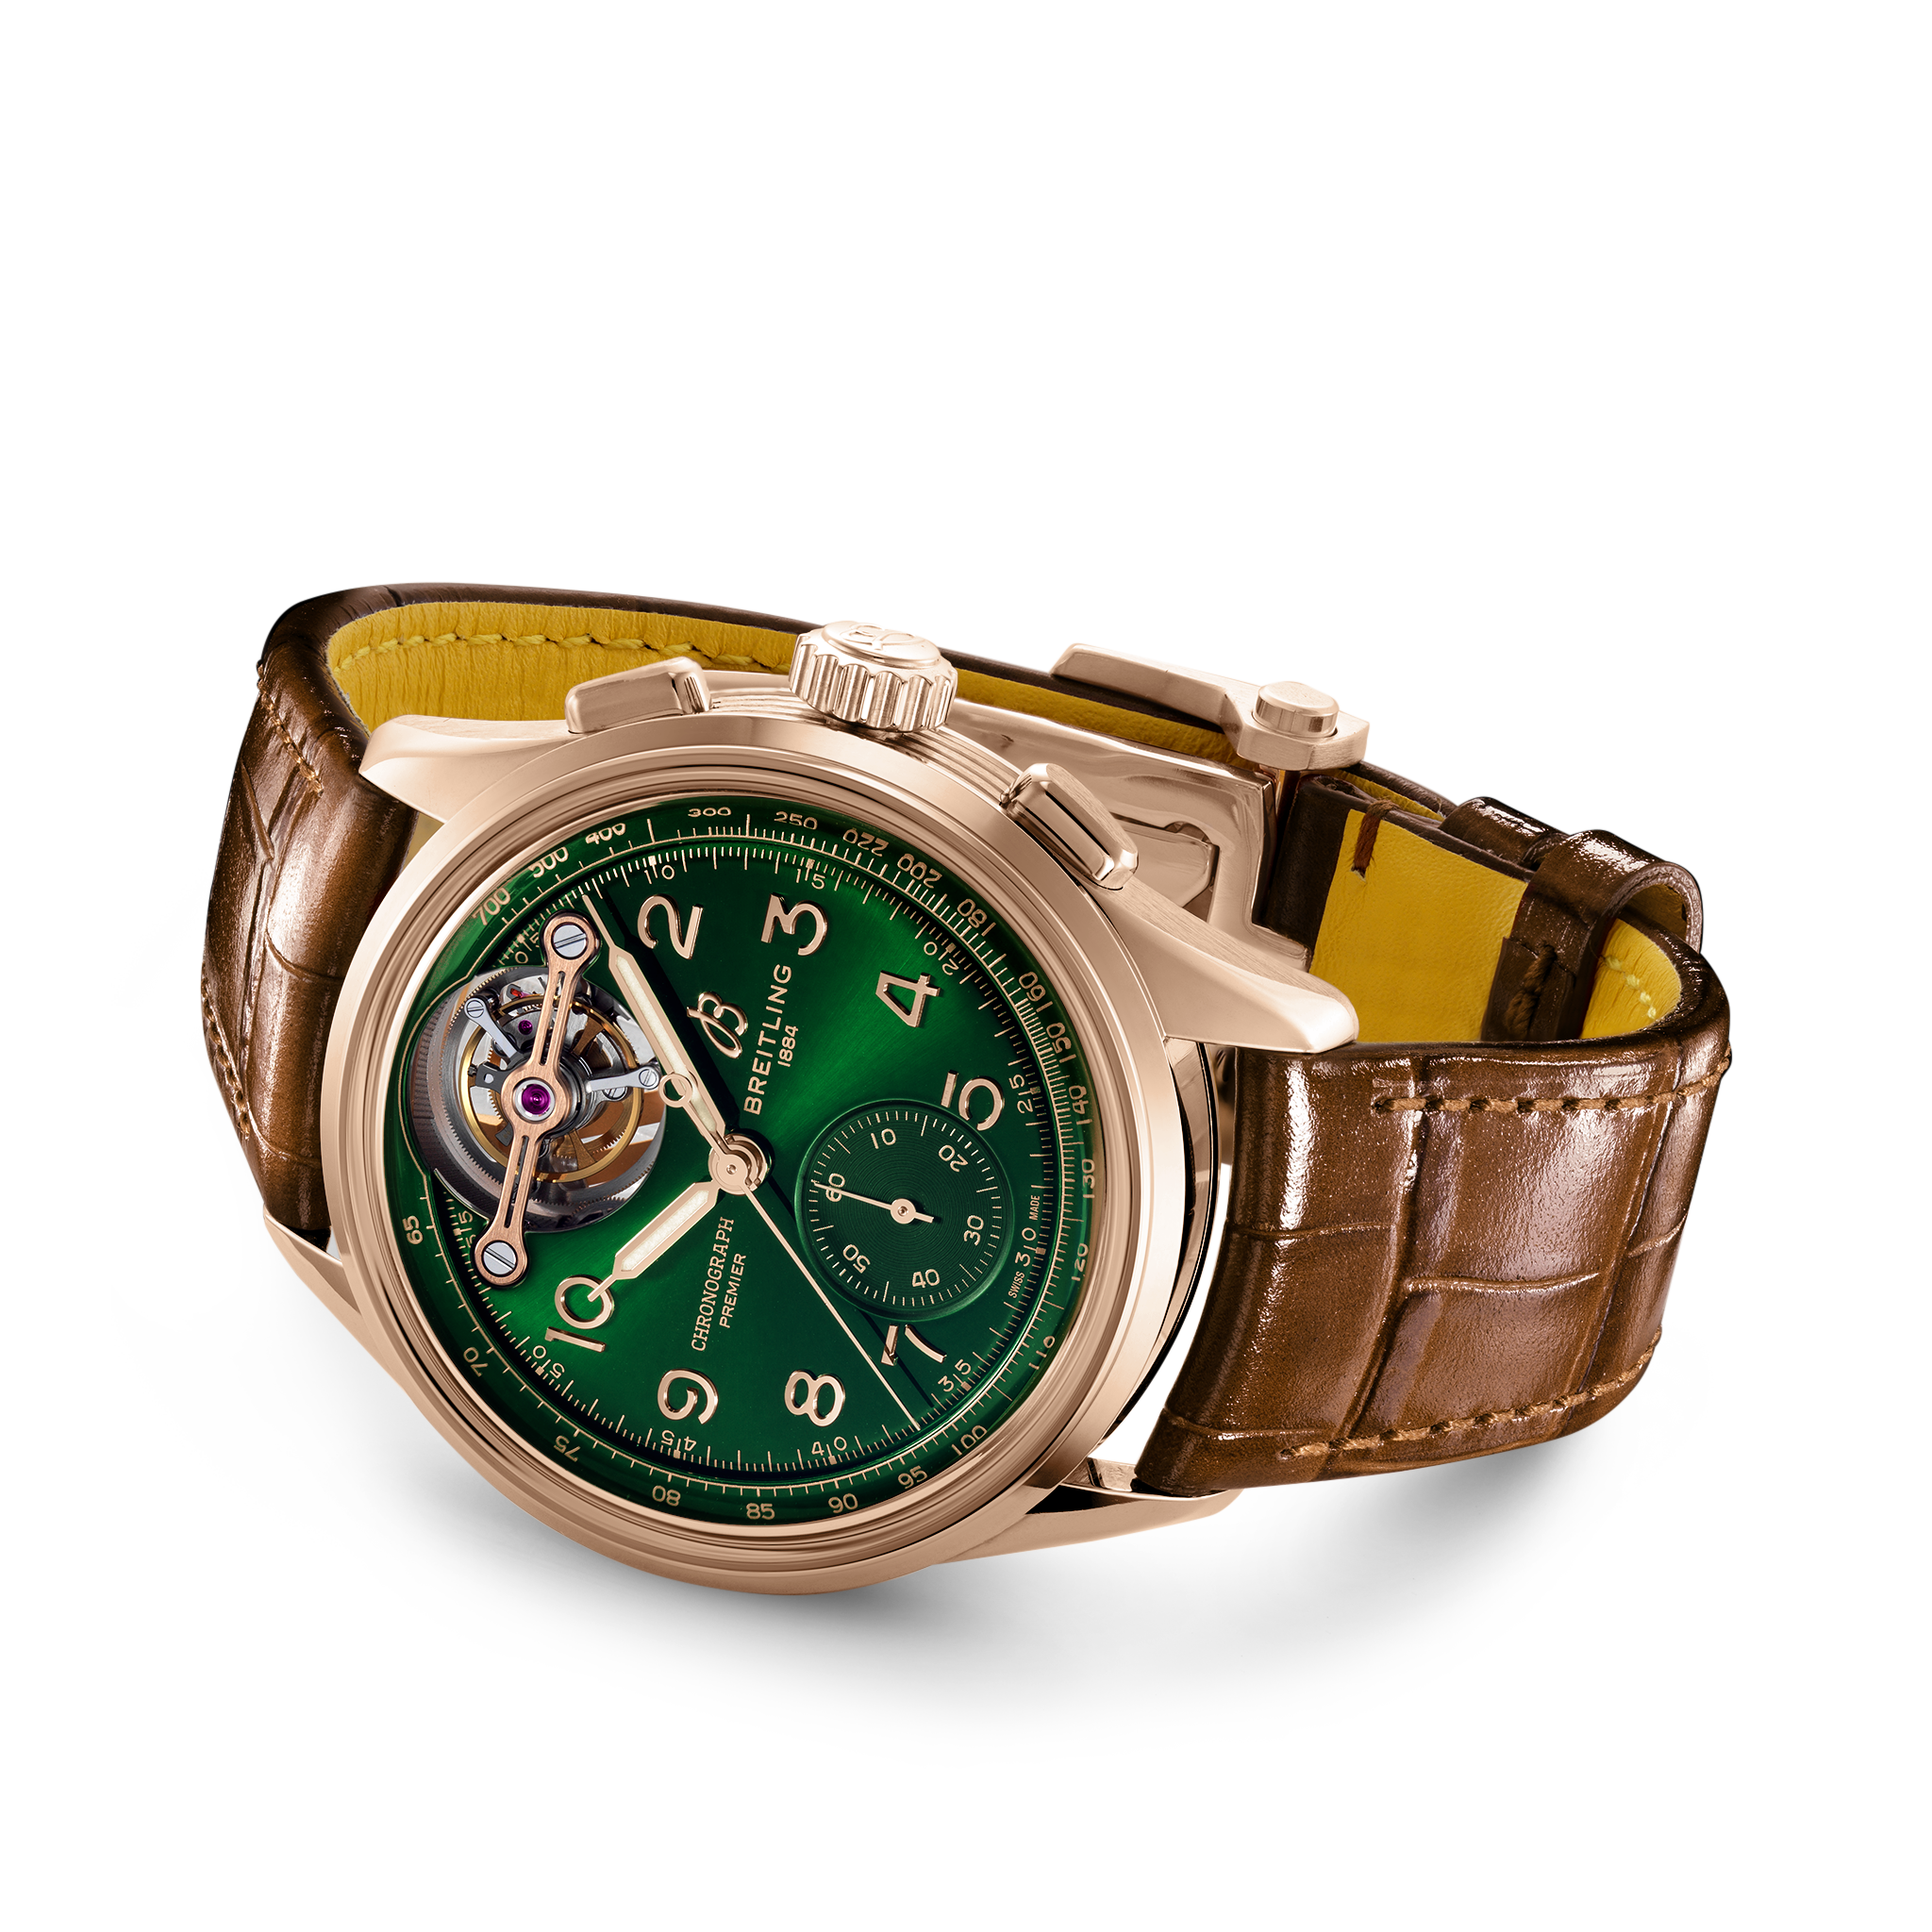 rb21201a1l1p1-premier-b21-chronograph-tourbillon-42-bentley-limited-edition-rolled-up.png